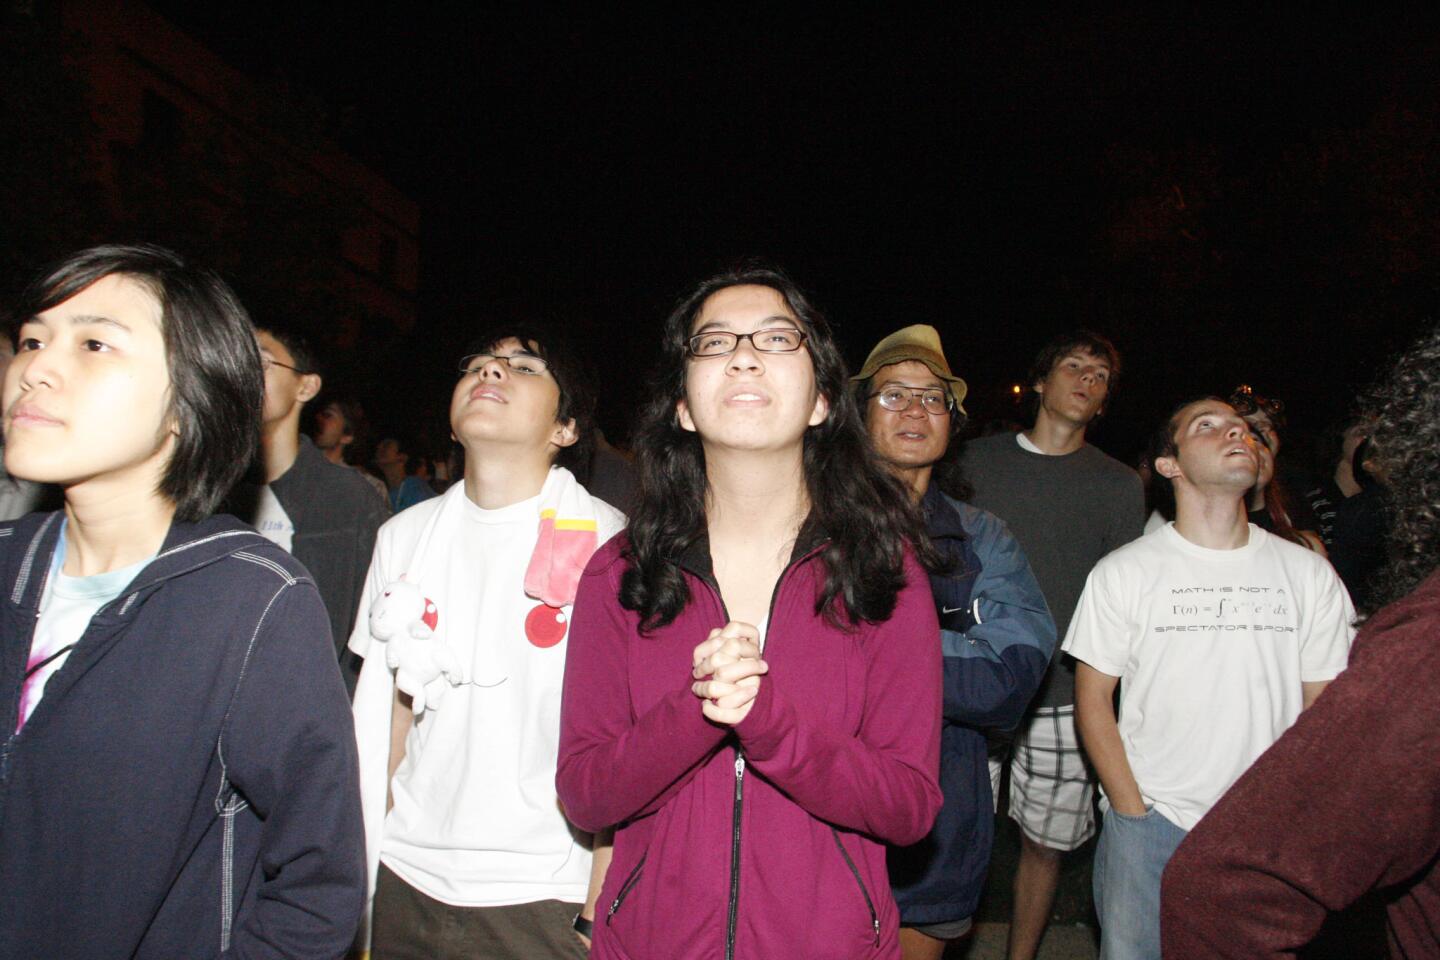 Annie Lee, center, and other students watch over 400 pumpkins drop from the ninth floor during Caltech's Annual Halloween Pumpkin drop, which took place at the Caltech's Millikan Library in Pasadena on Wednesday, October 31, 2012.